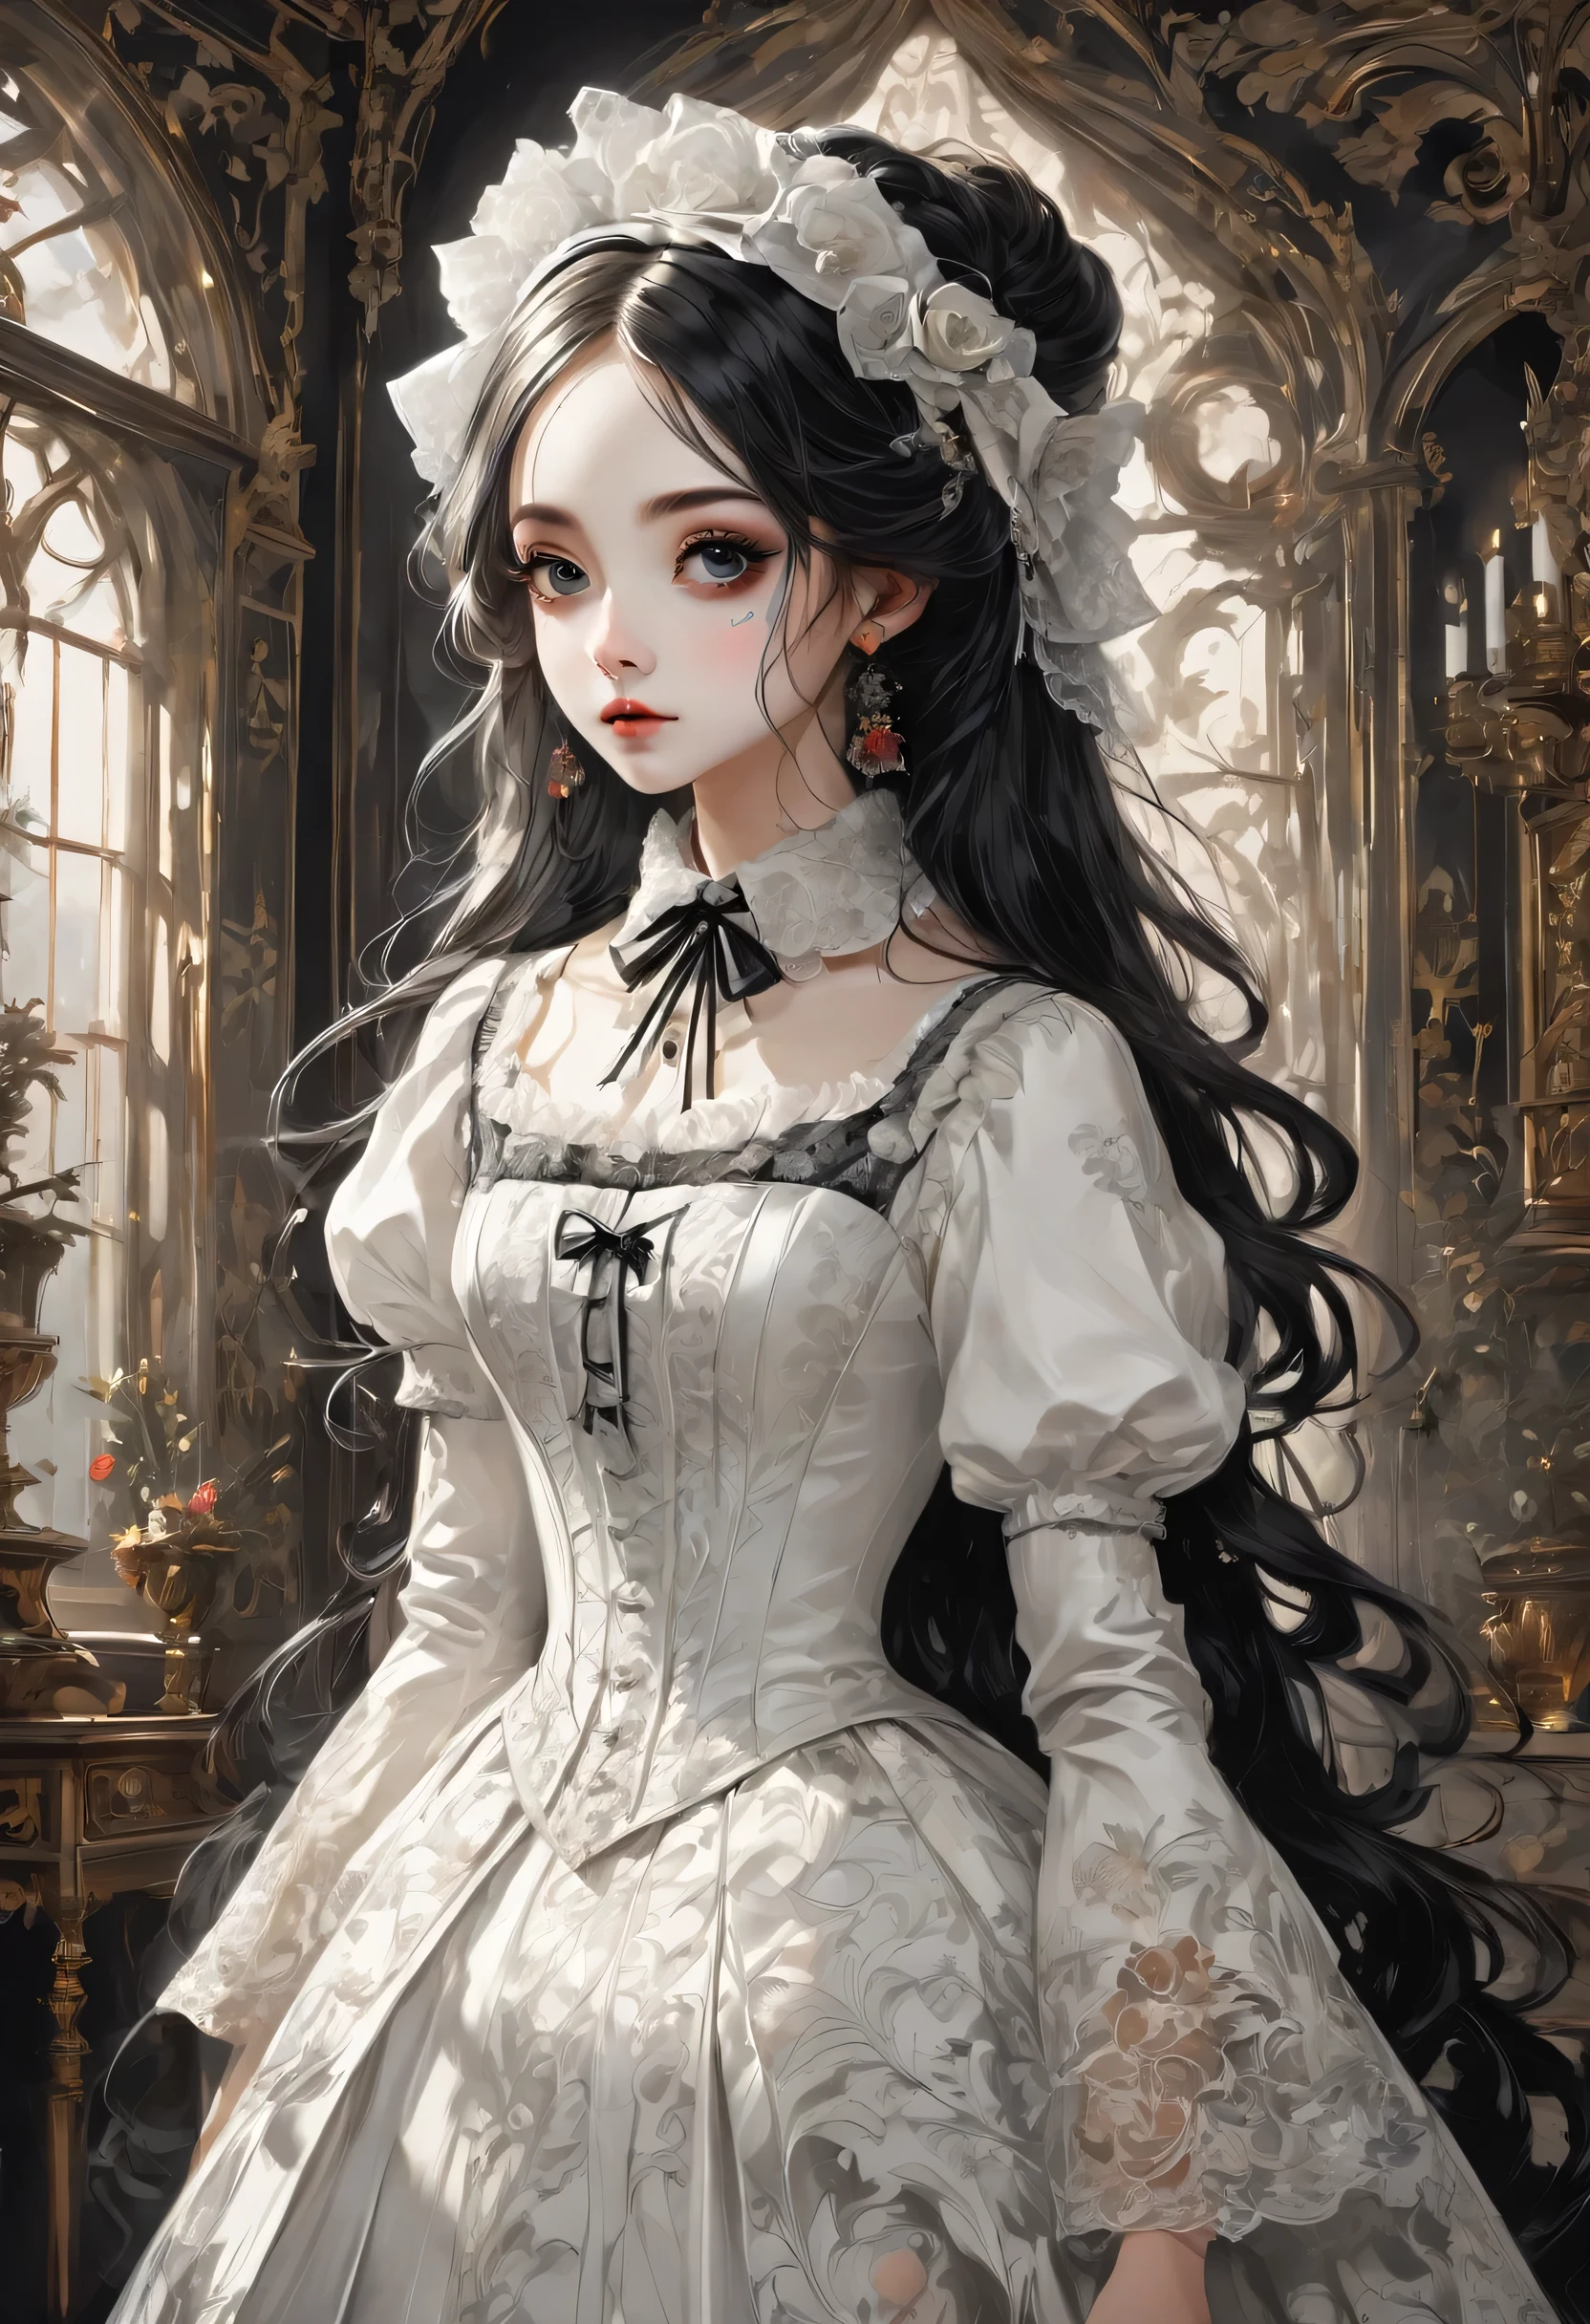 Gothic horror paintings,((Beautiful girl standing:Gothic Lolita:12 years old:Ephemeral:beautiful girl:cute:Adorable:Perfect Face:White:eyelash:Big eyes)),Gothic House,Looking Back,Black and White,scary but beautiful,Gothic Beauty,Expressing beautiful madness,Shrouded in mystery,Placing dark clouds that foreshadow tragedy in a beautiful gothic house,,detailed,Use red as an accent color,Race,embroidery,Detailed pattern,rendering,Designer House,Luxury Homes,nice,quiet,Beautiful light and shadow,Gothic Room,Golden Ratio,Anatomically correct,Rococo